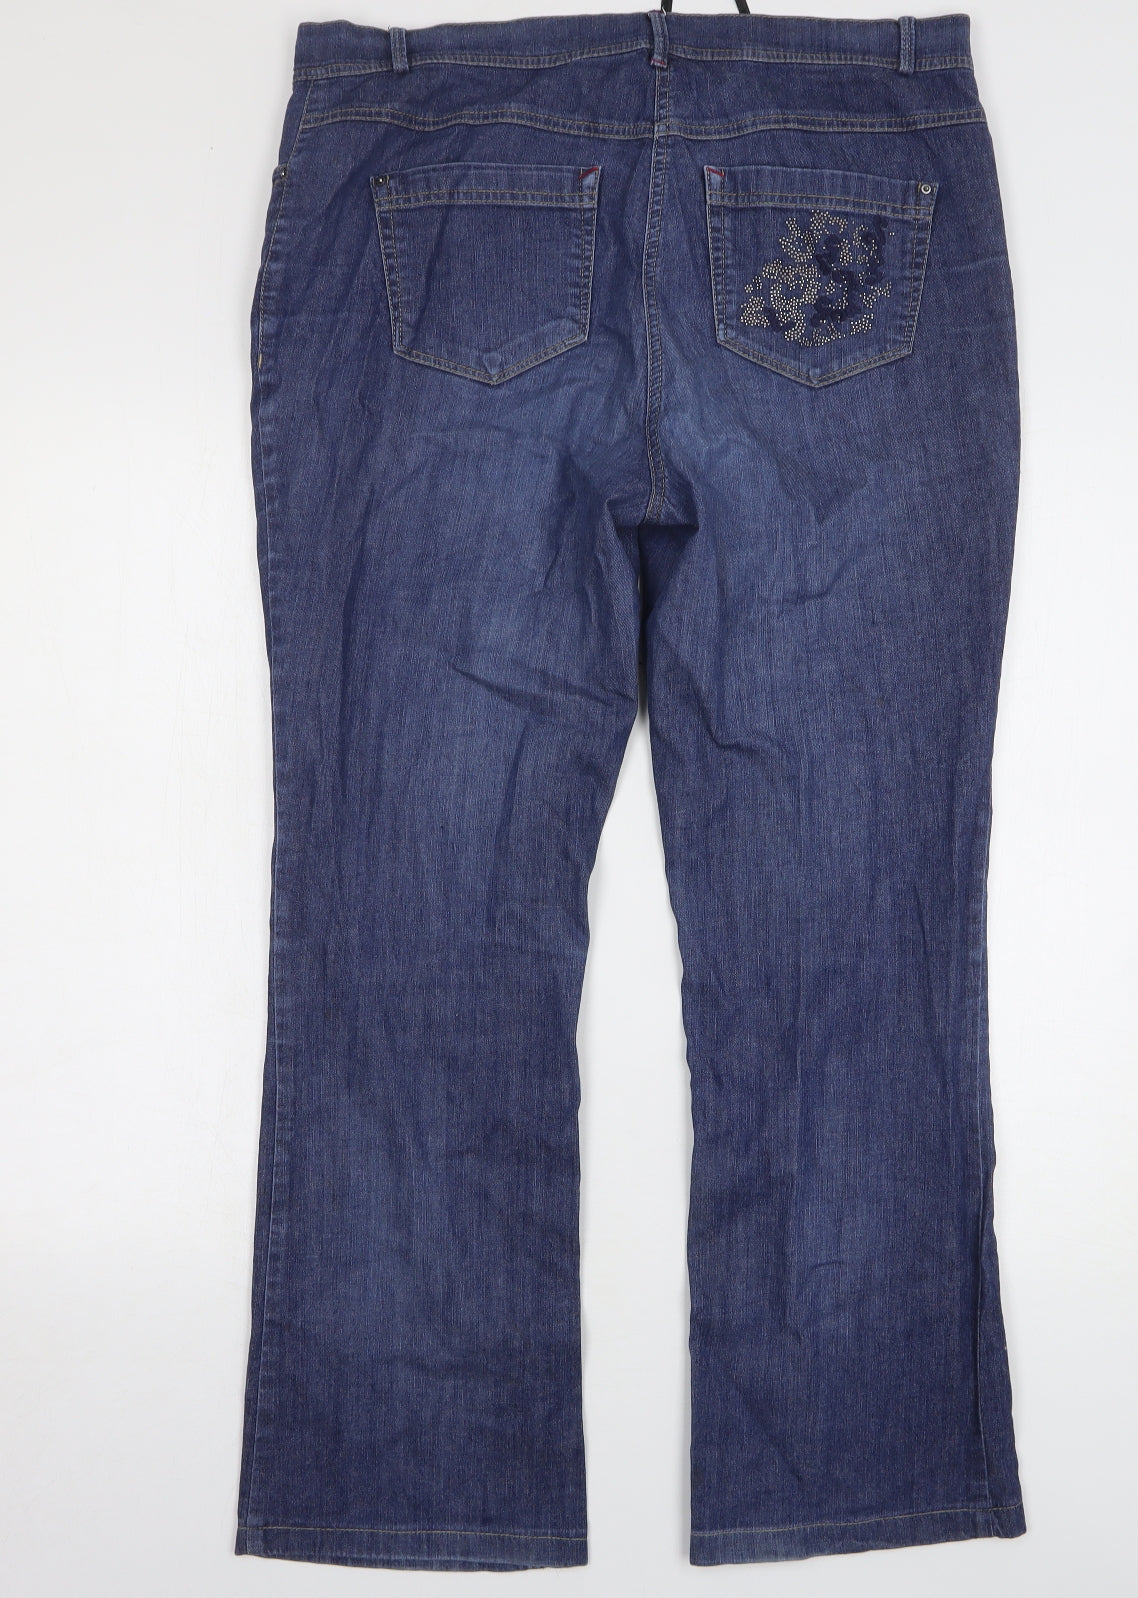 Gelco Womens Blue Cotton Bootcut Jeans Size 36 in L29 in Regular Zip